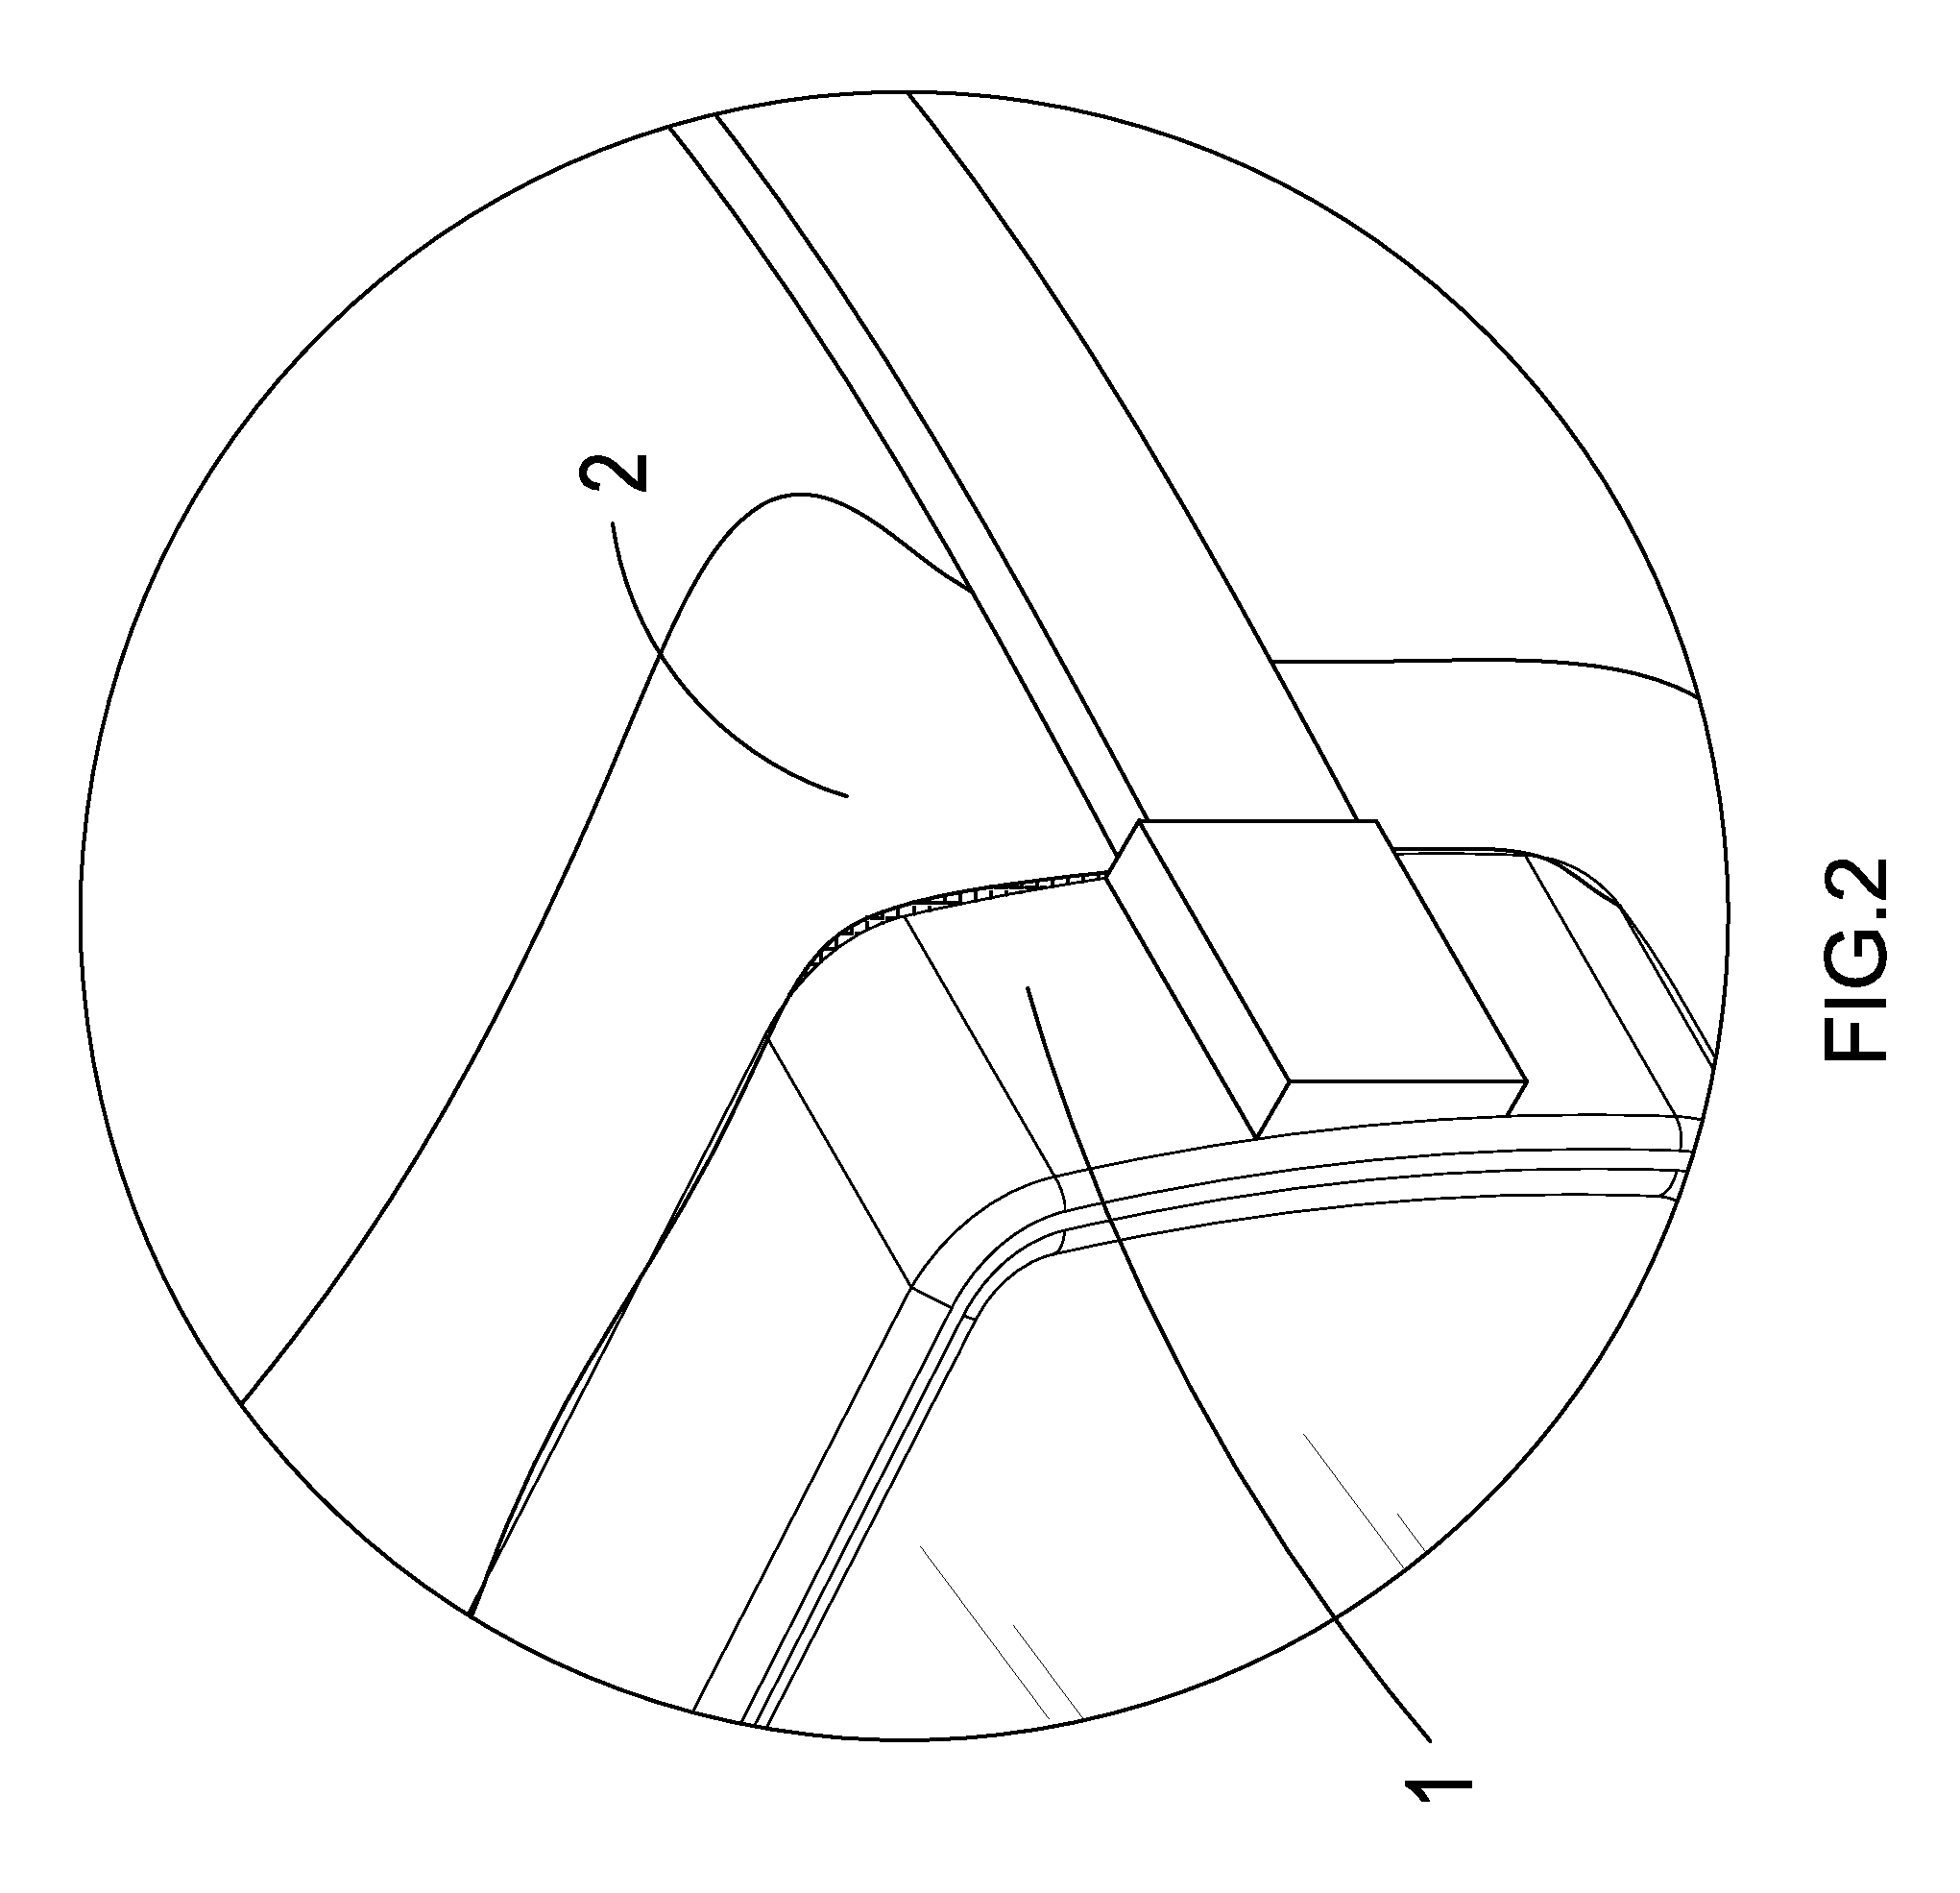 Scuba mask structure and manufacturing process thereof